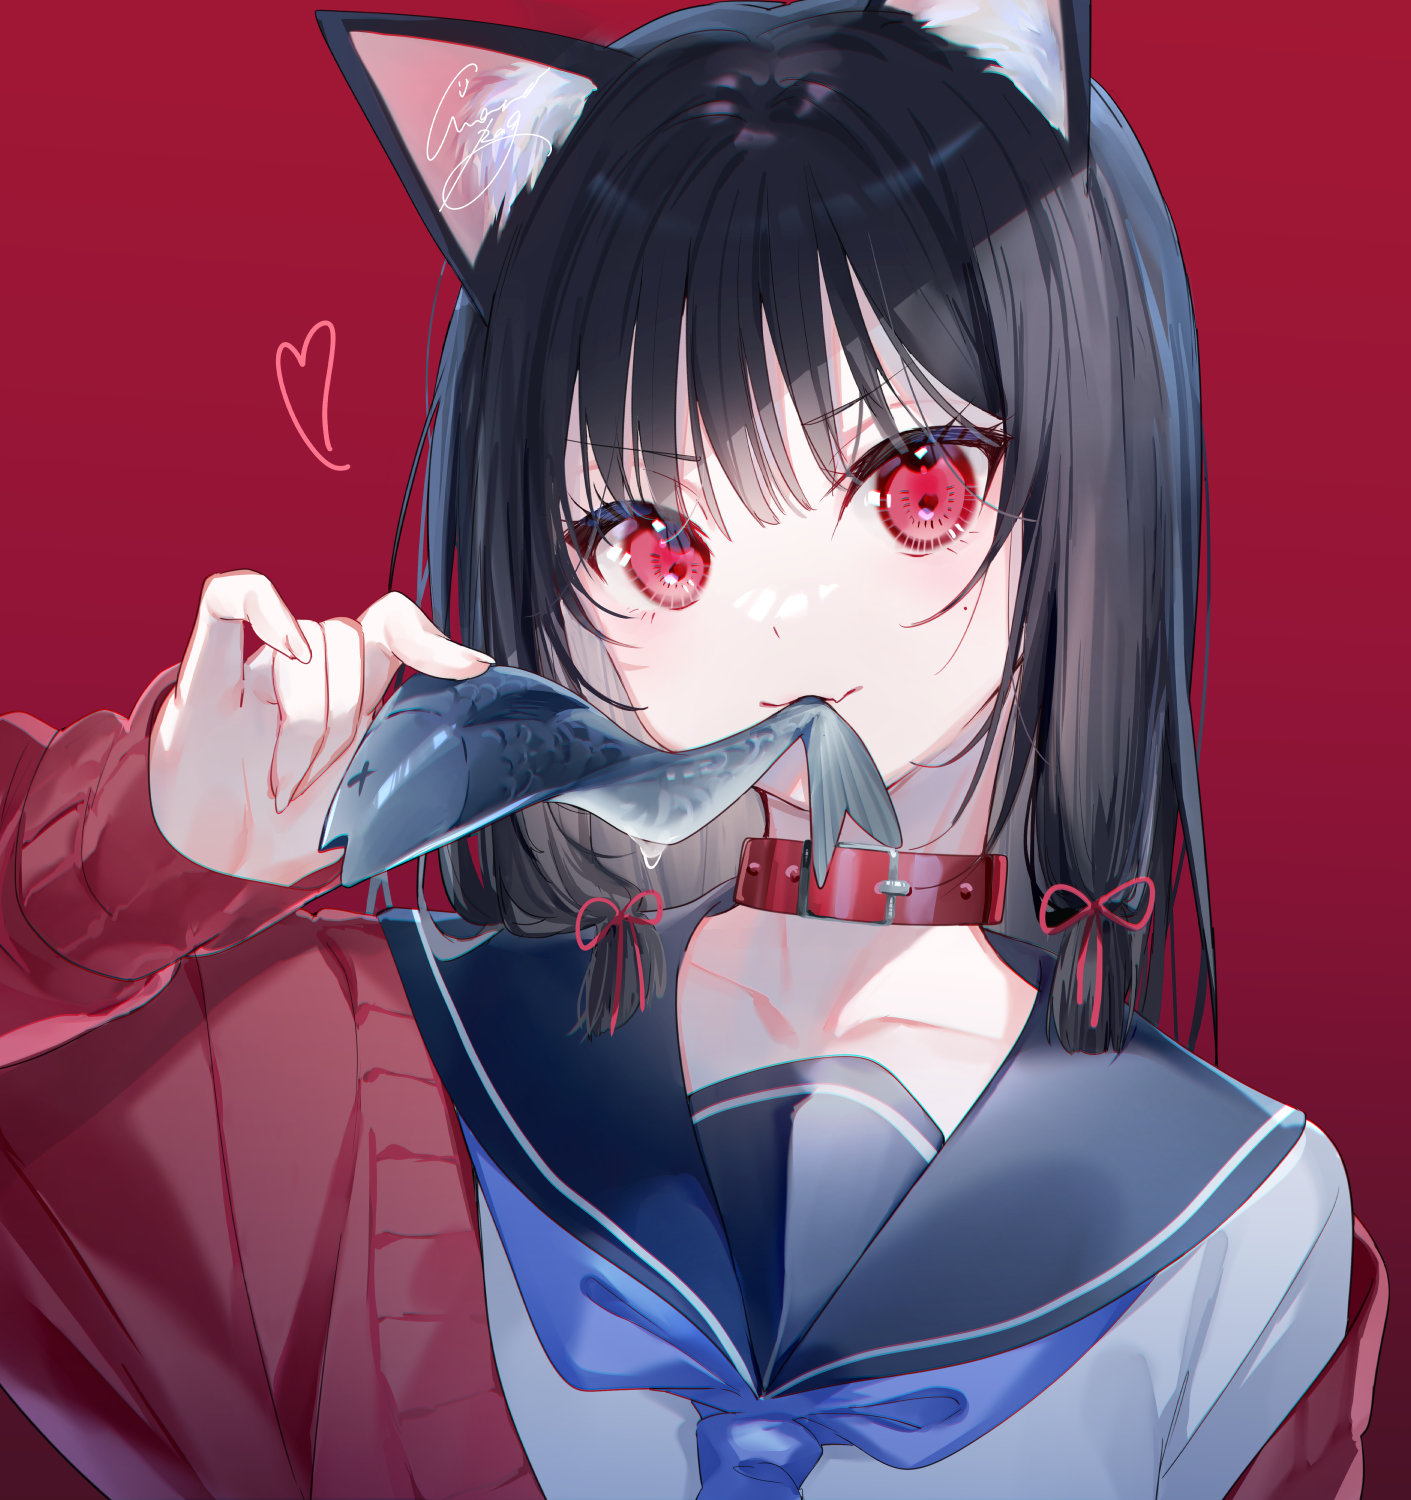 Premium Photo  Cute anime cat girl with cat ears and a tail wearing a  sailor outfit on colorful background with playful details like hearts and  paw prints manga style illustration generative